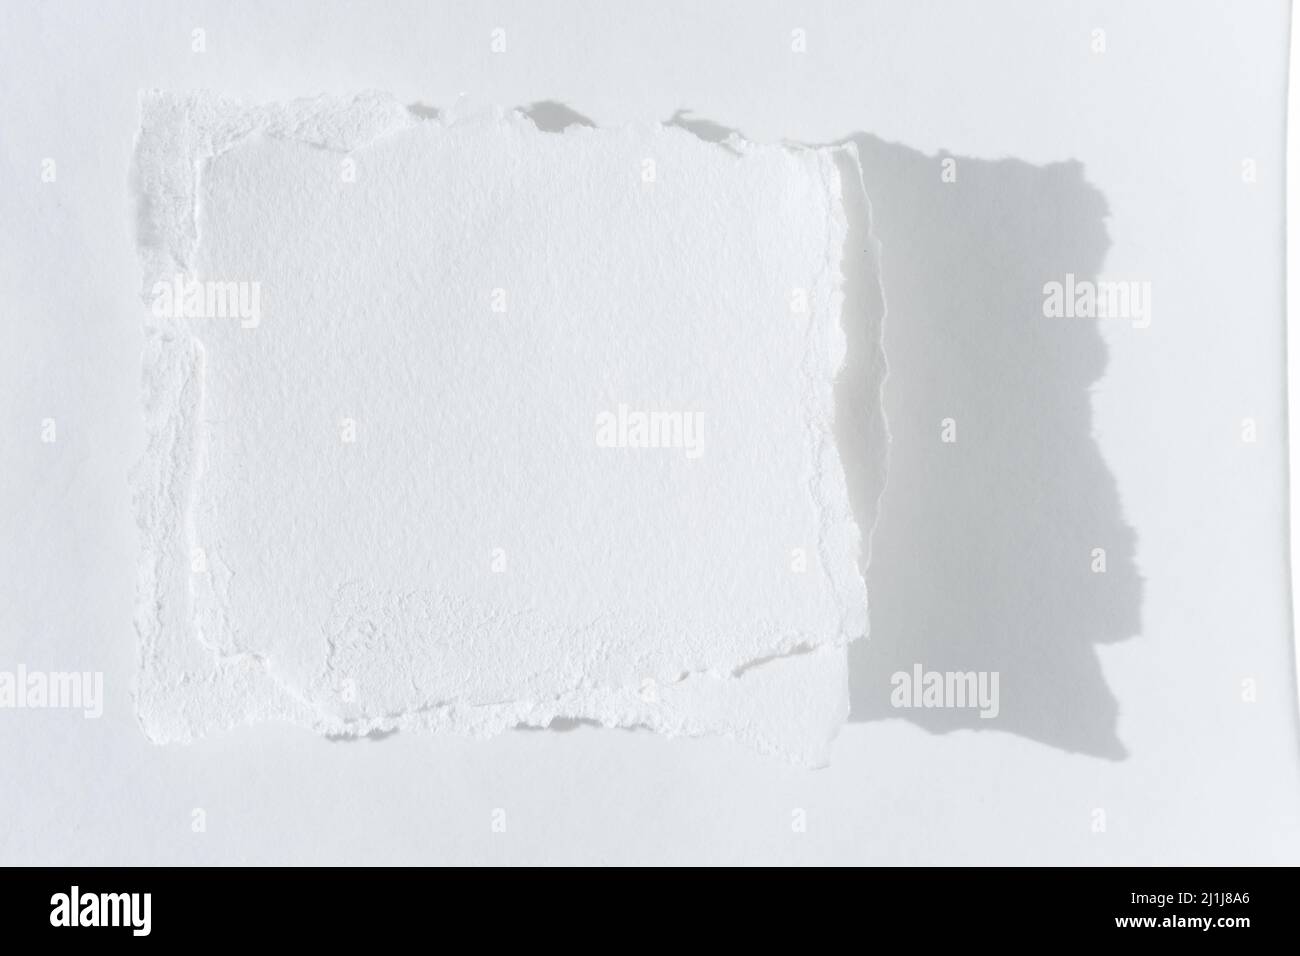 Scraps of paper. Two pieces of torn white paper on a light background. Stock Photo